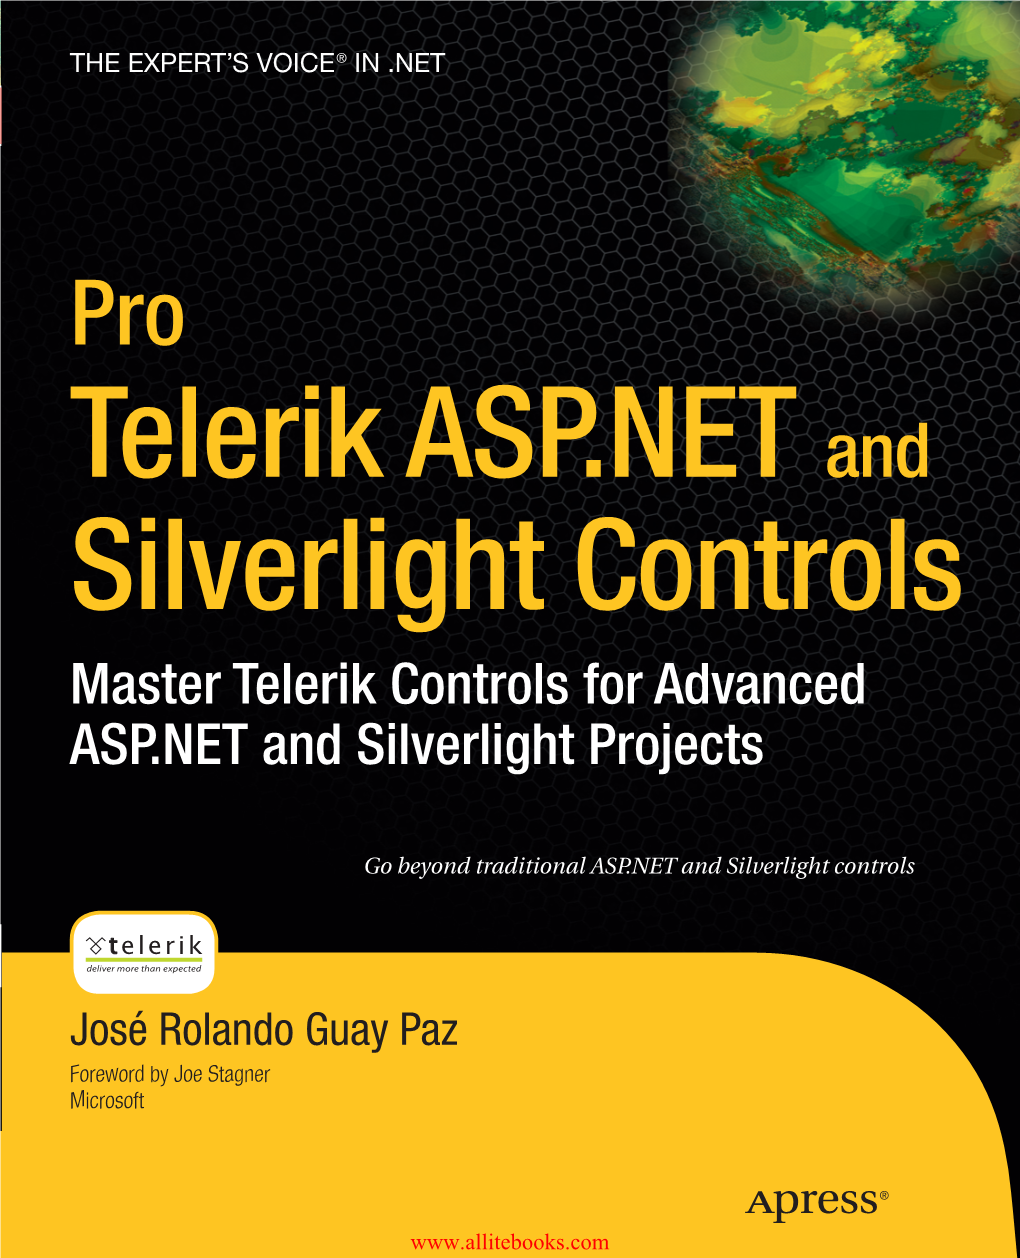 Telerik ASP.NET and Silverlight Controls Master Telerik Controls for Advanced ASP.NET and Silverlight Projects